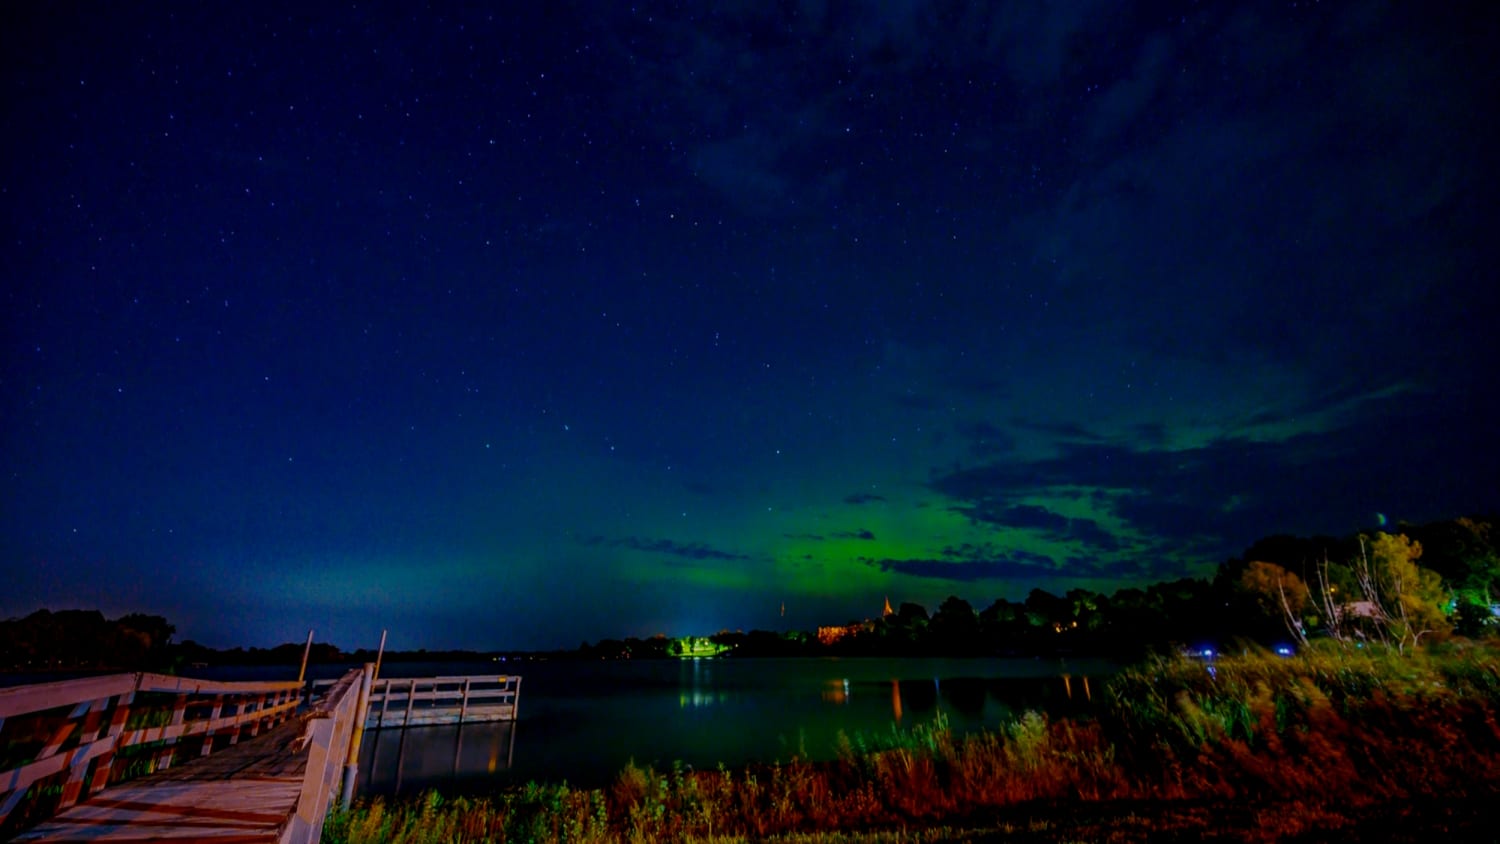 Northern lights put on a show across parts of Canada and U.S.